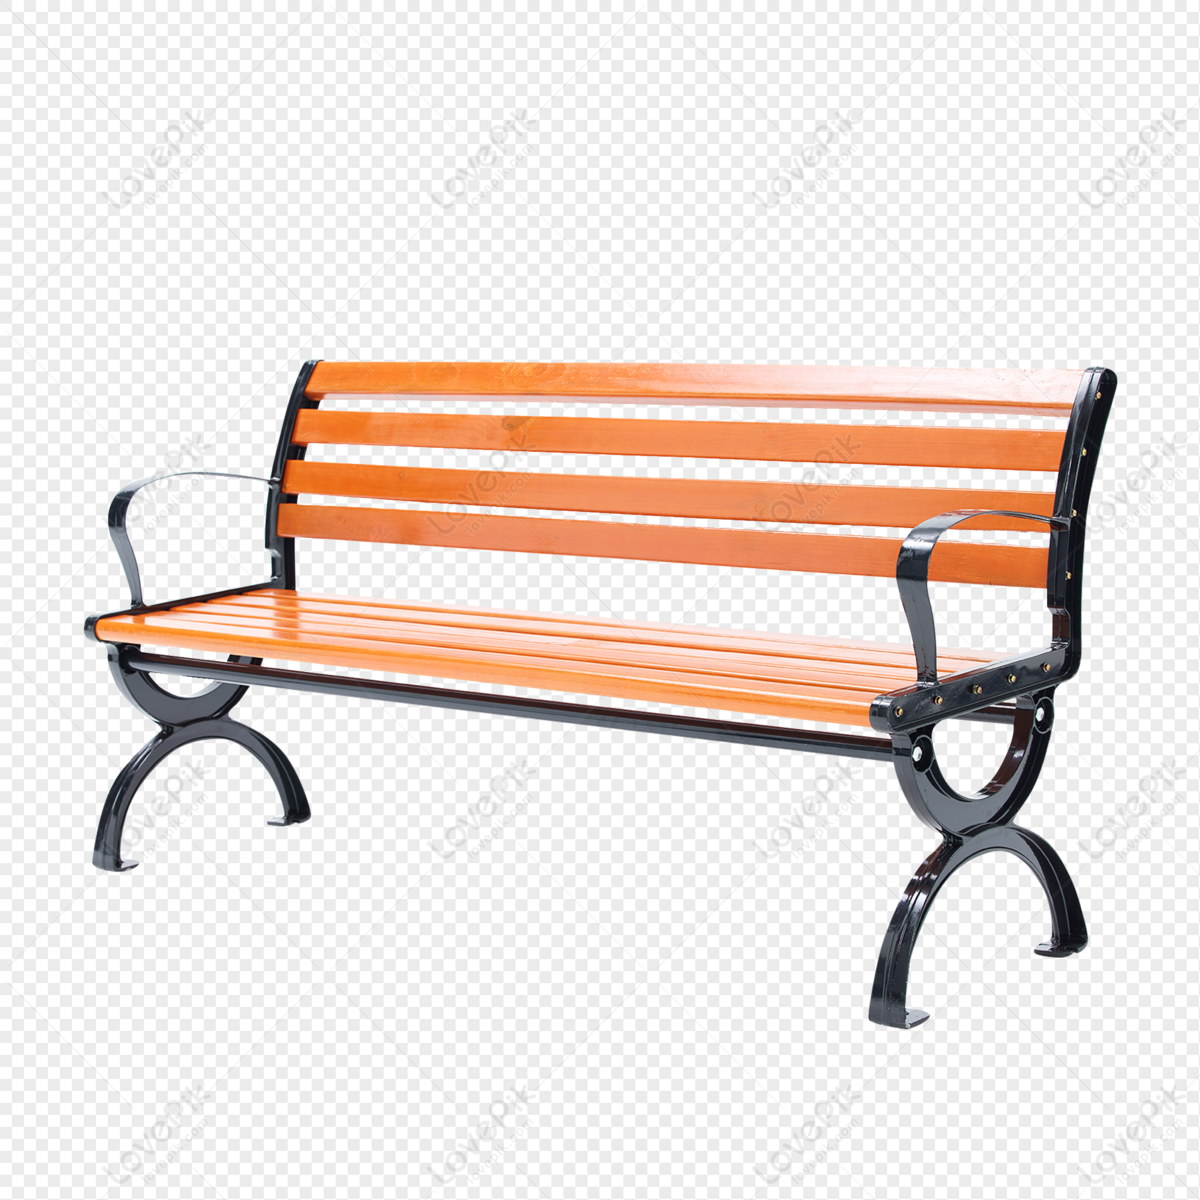 Park Bench PNG Hd Transparent Image And Clipart Image For Free Download -  Lovepik | 402005424